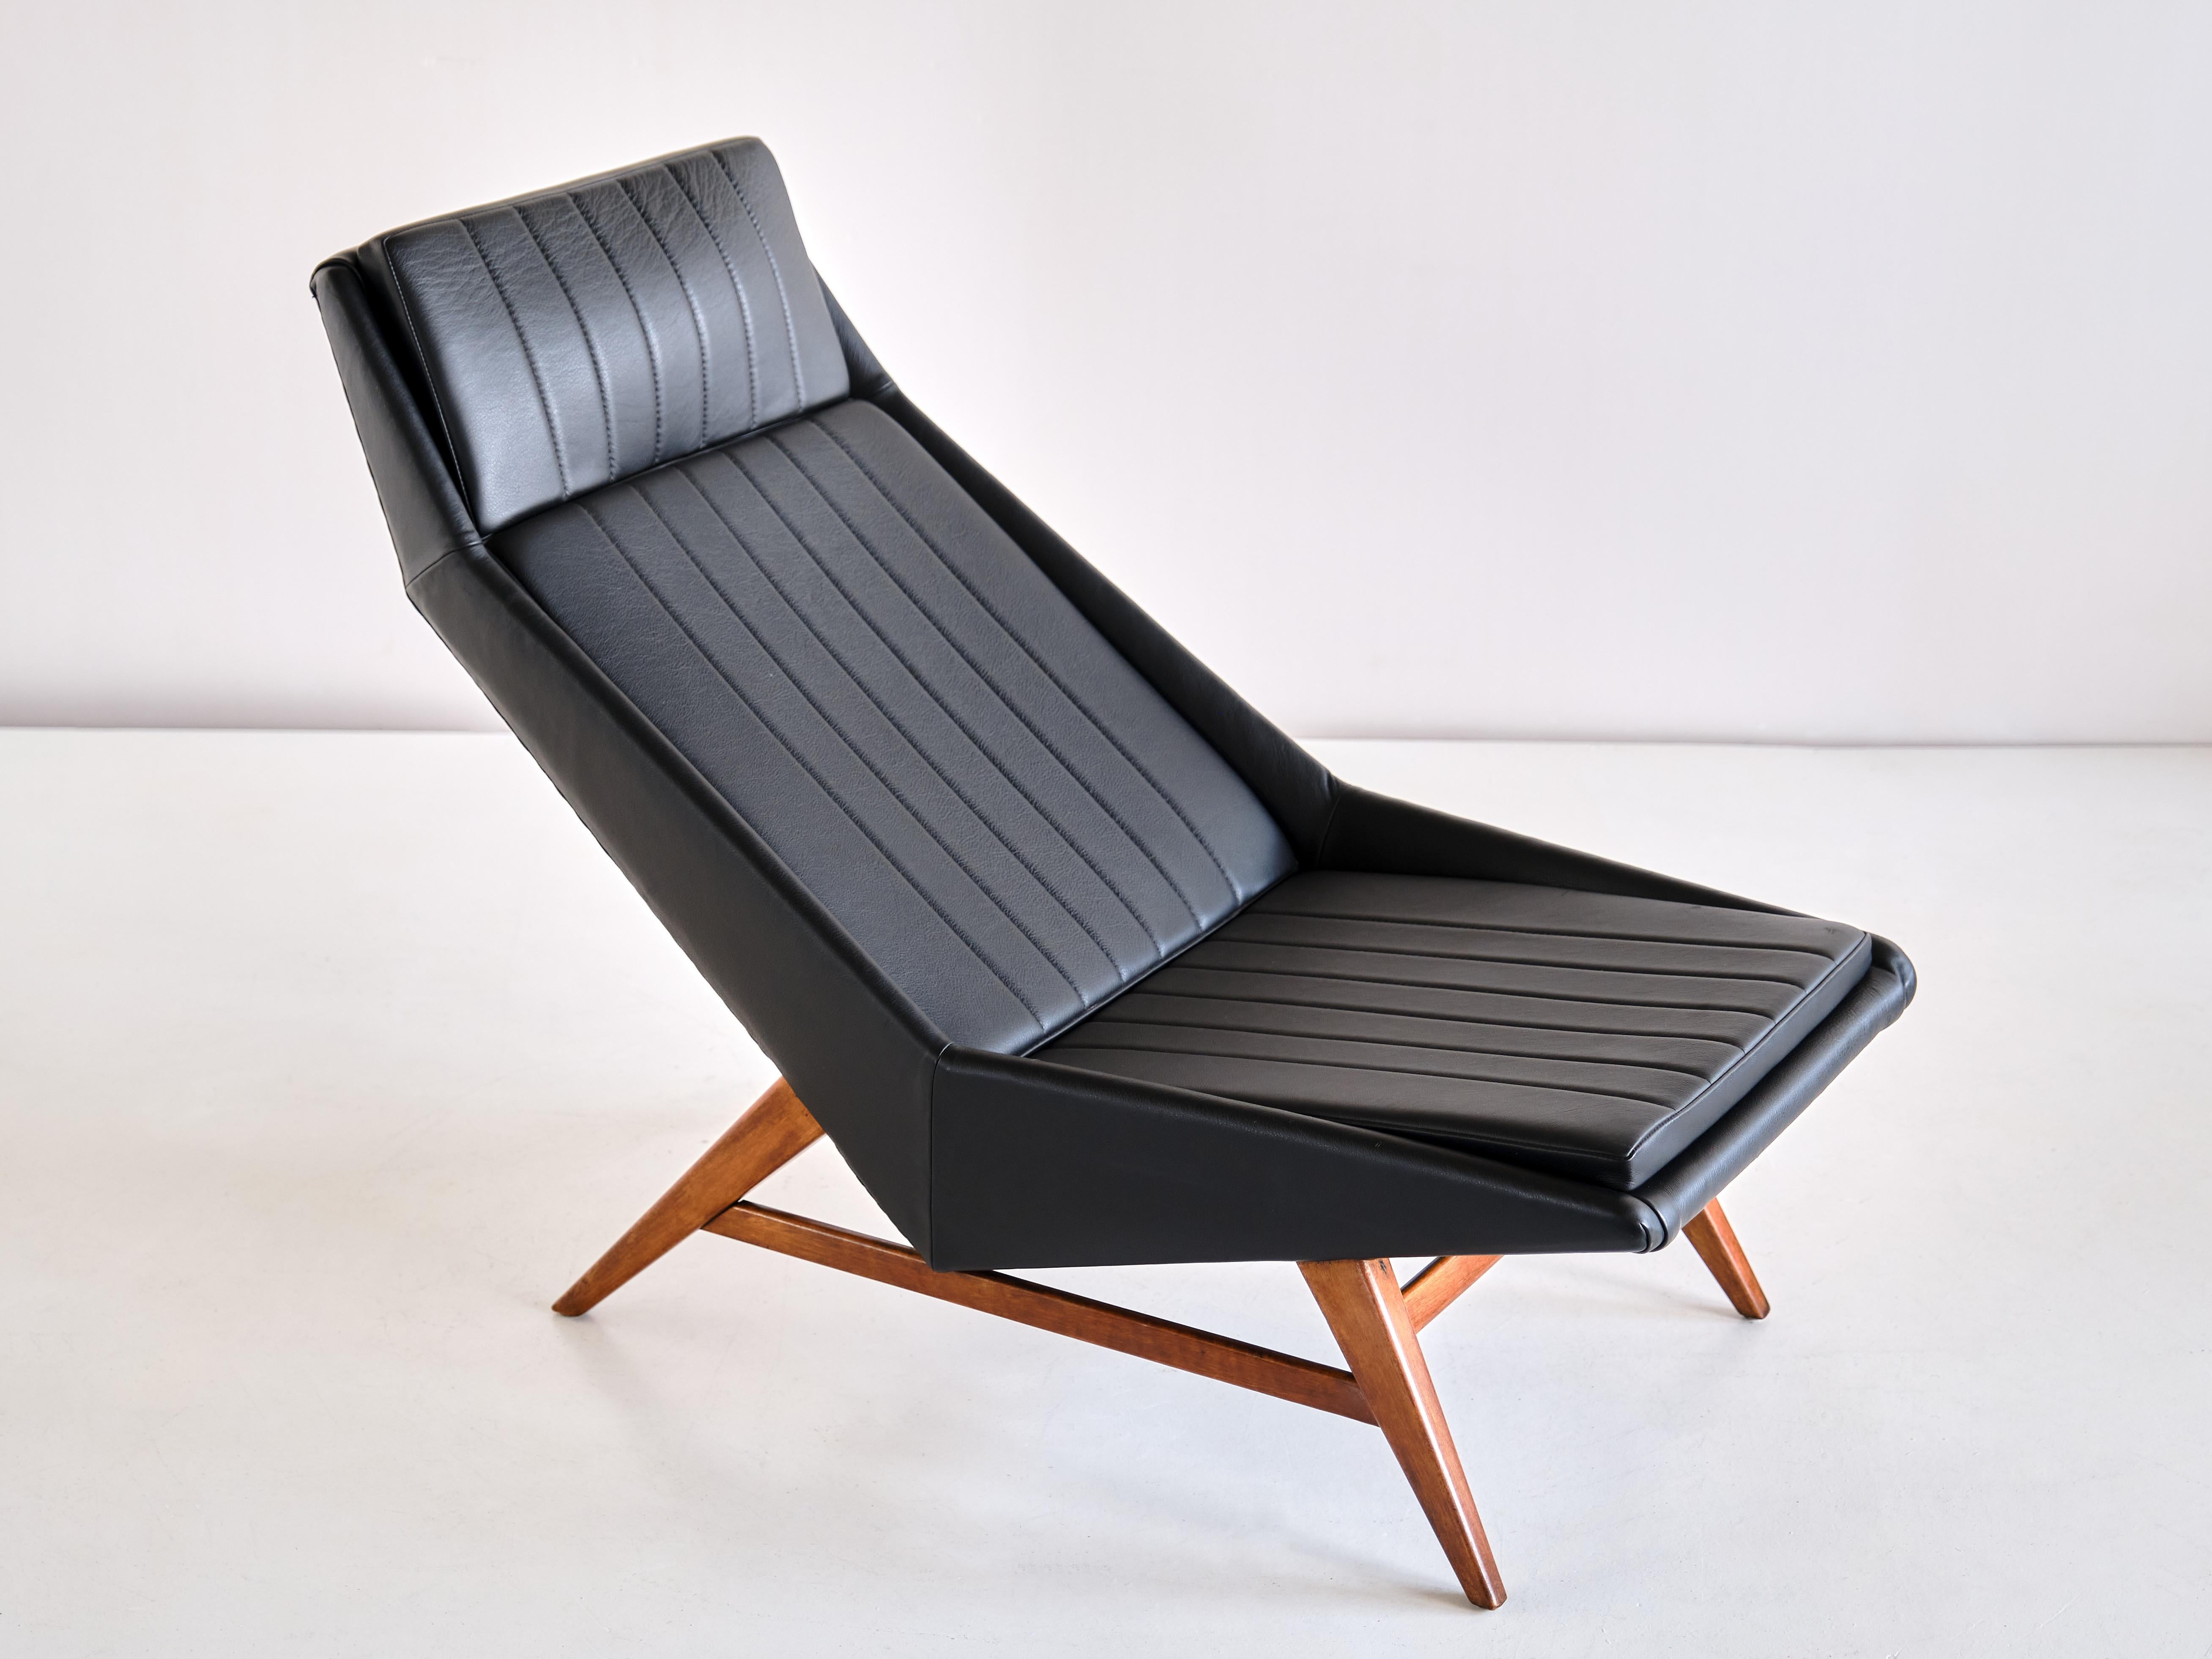 Svante Skogh Lounge Chair in Leather and Beech, AB Hjertquist & Co, Sweden, 1955 For Sale 2